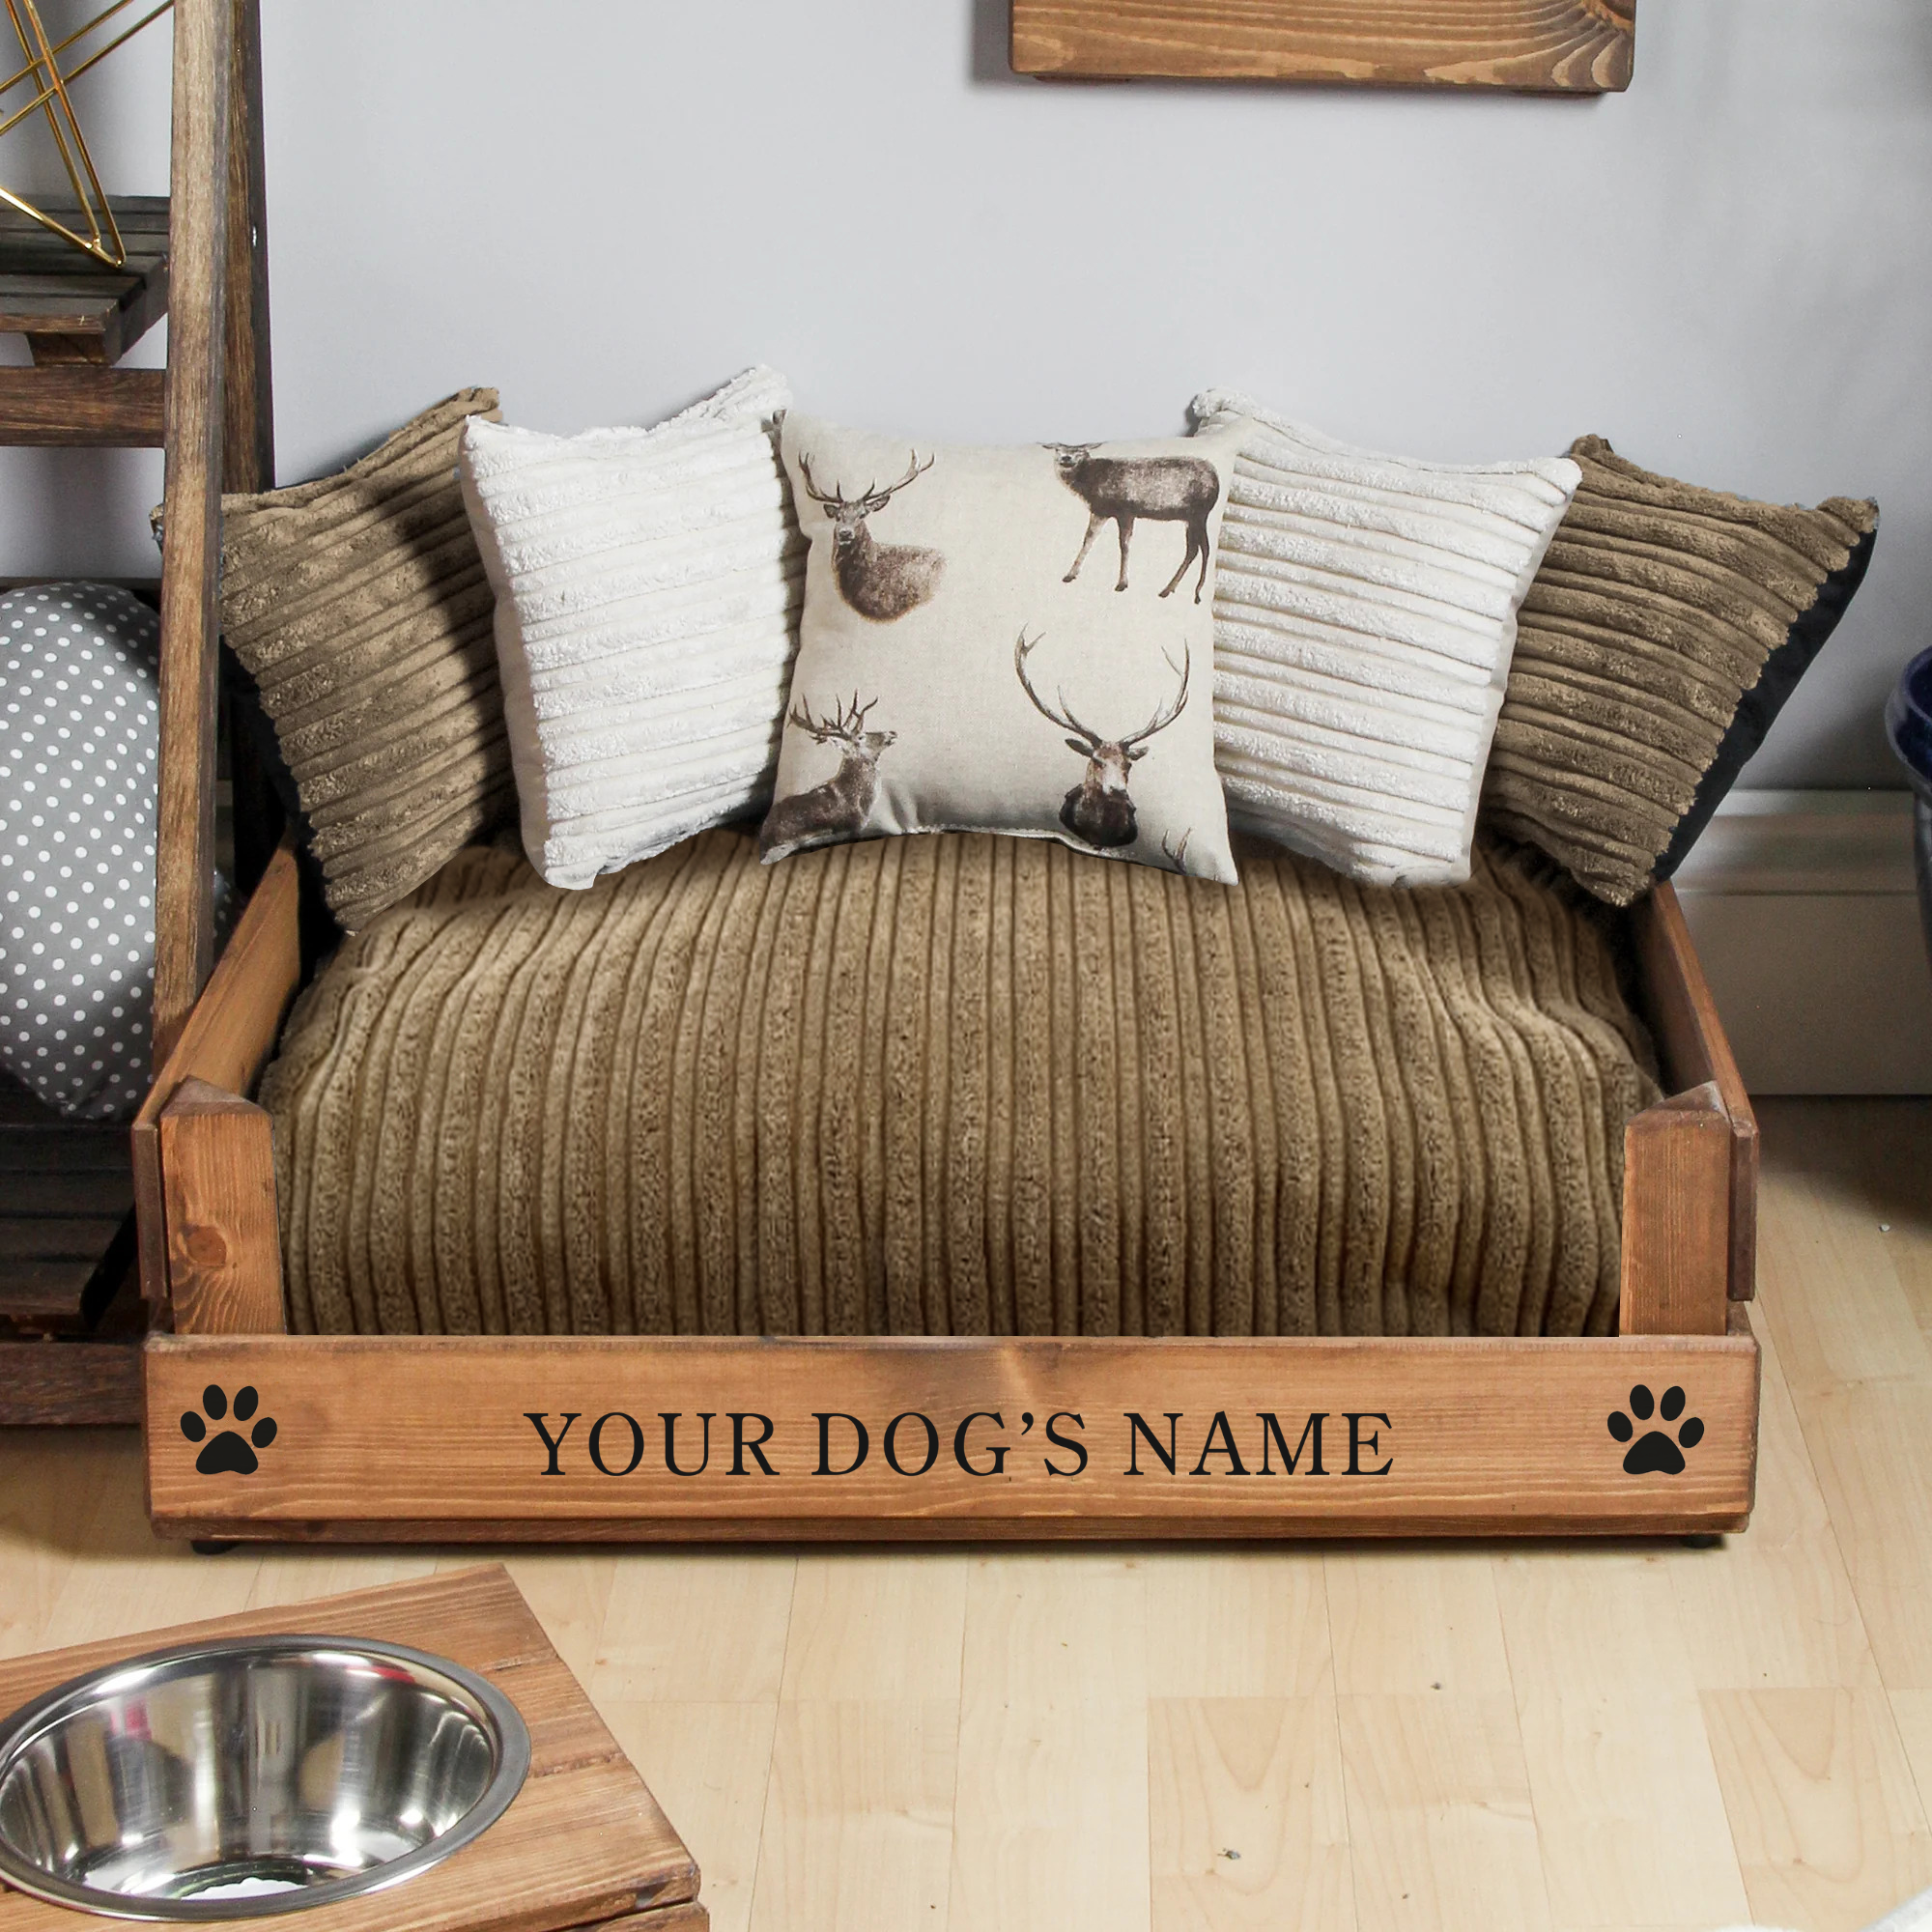 X Small Wooden Personalised Dog Bed (39 x 46cm) - Royal Oak & Corduroy Brown